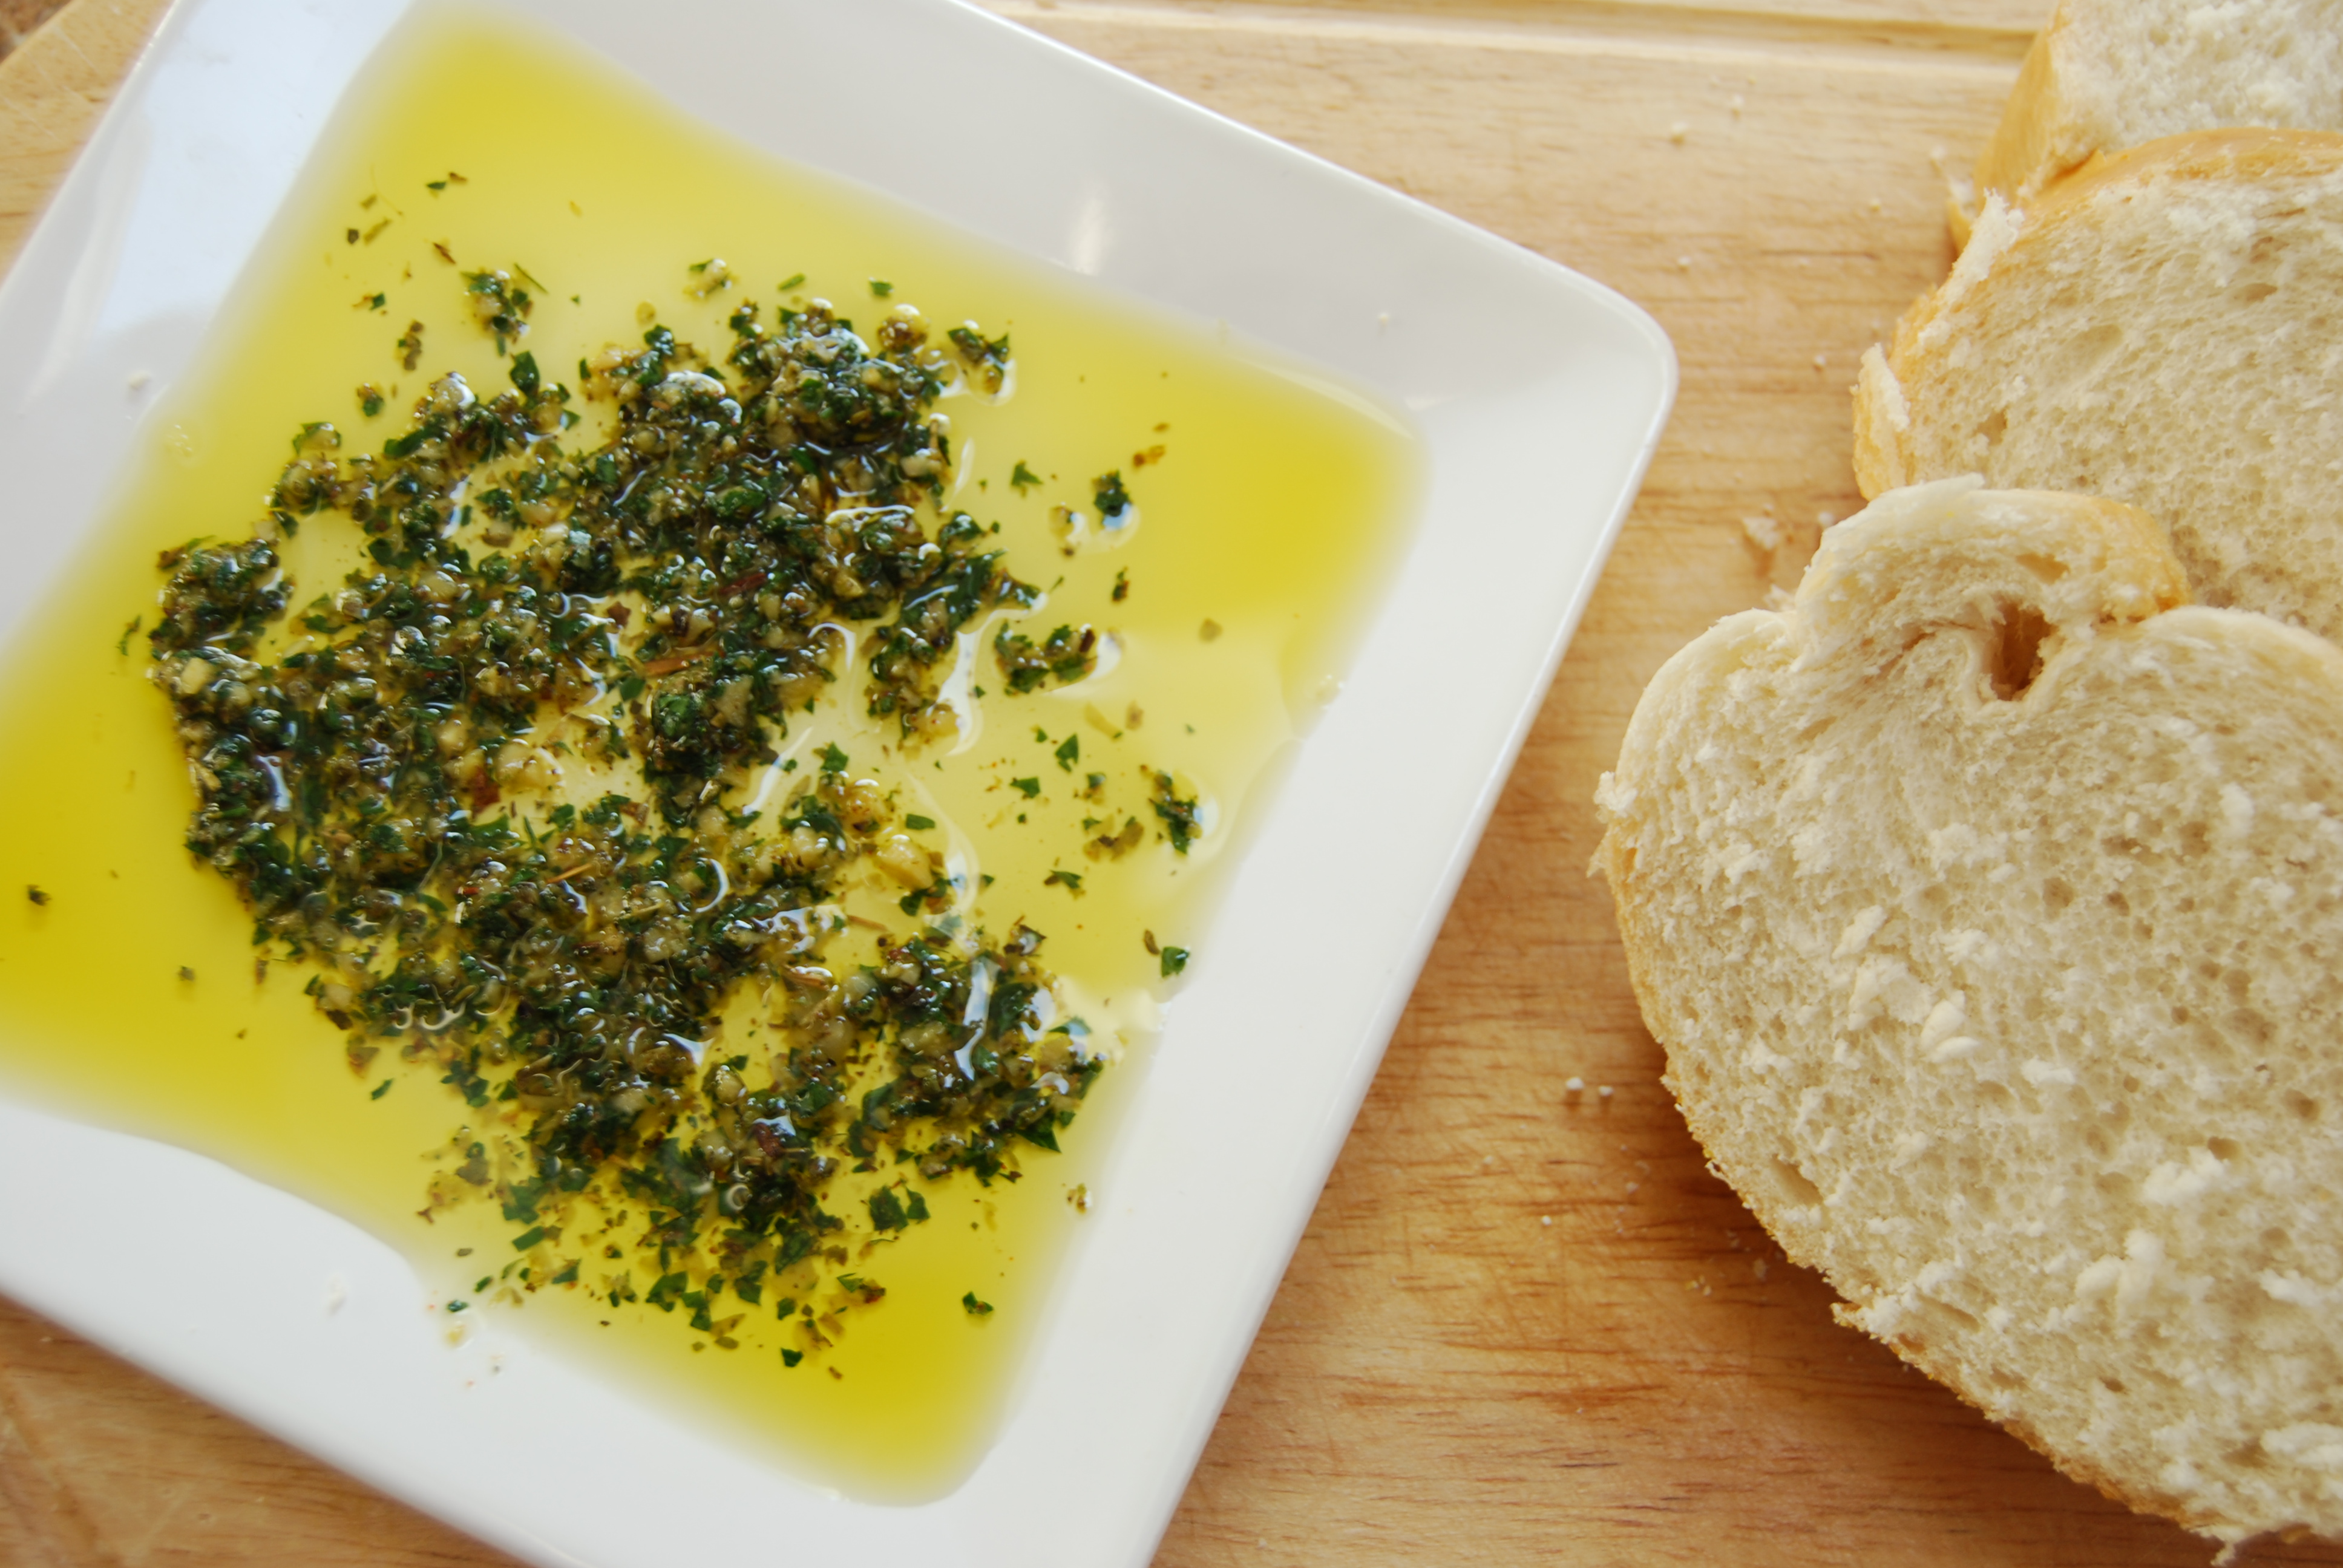 What Herbs Are In Carrabba’s Bread Dip